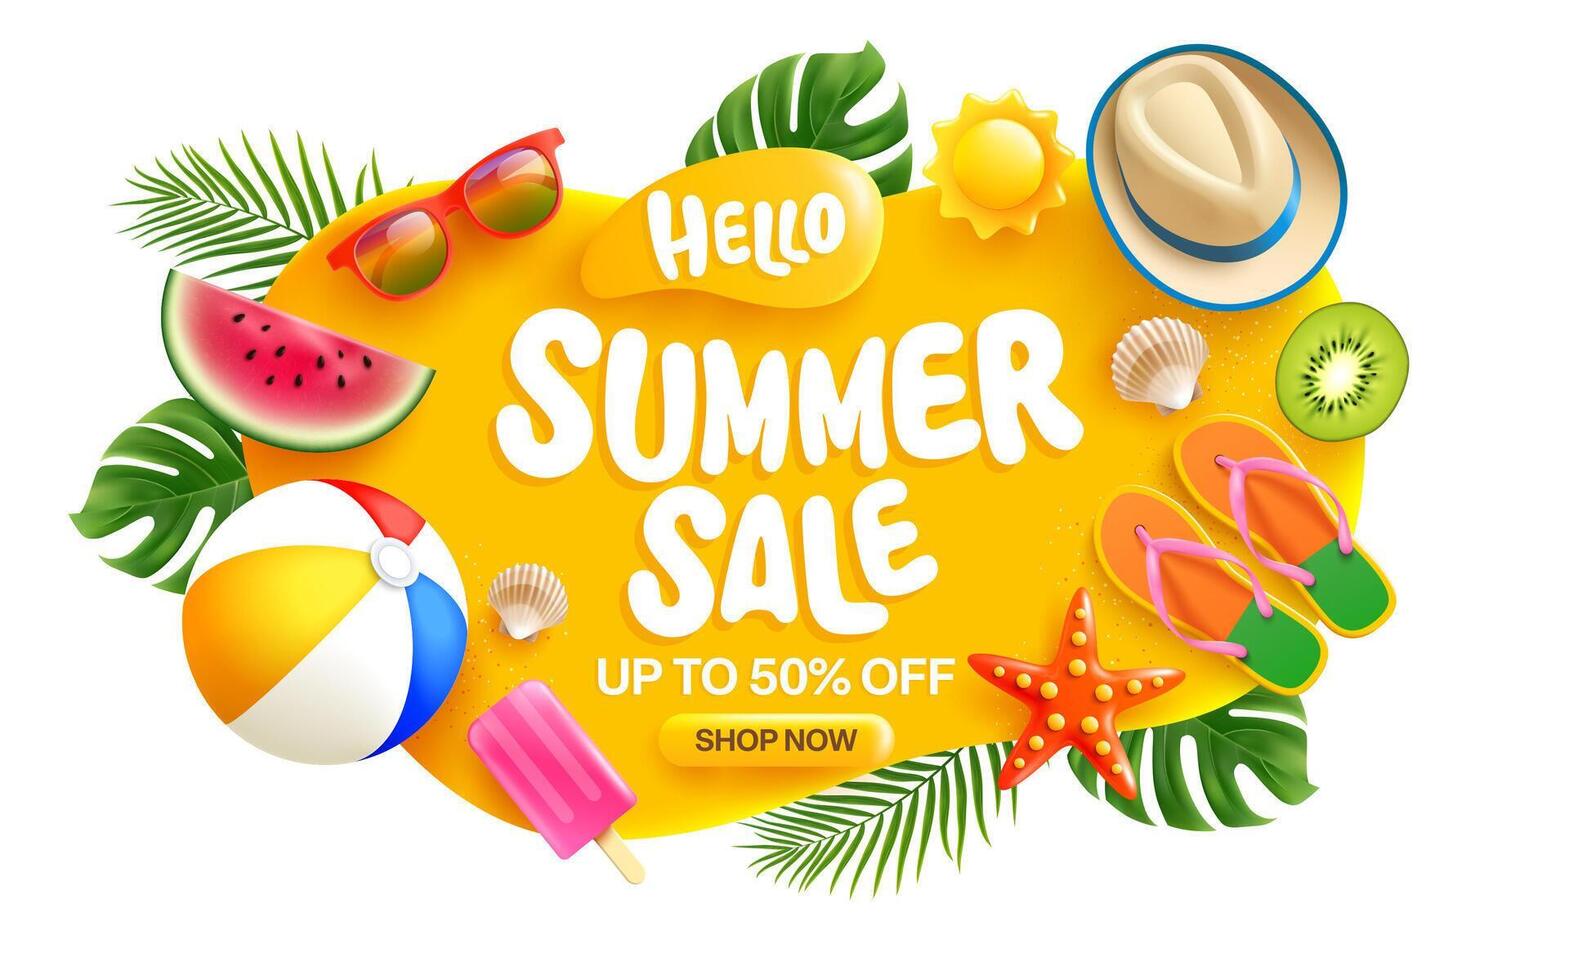 Colorful Summer Sale Banner with Sunglasses, Watermelon, Ice Cream, and Beach Ball, Vibrant Summer Sale Advertisement with Beach Accessories,Fruits and Tropical leaves vector